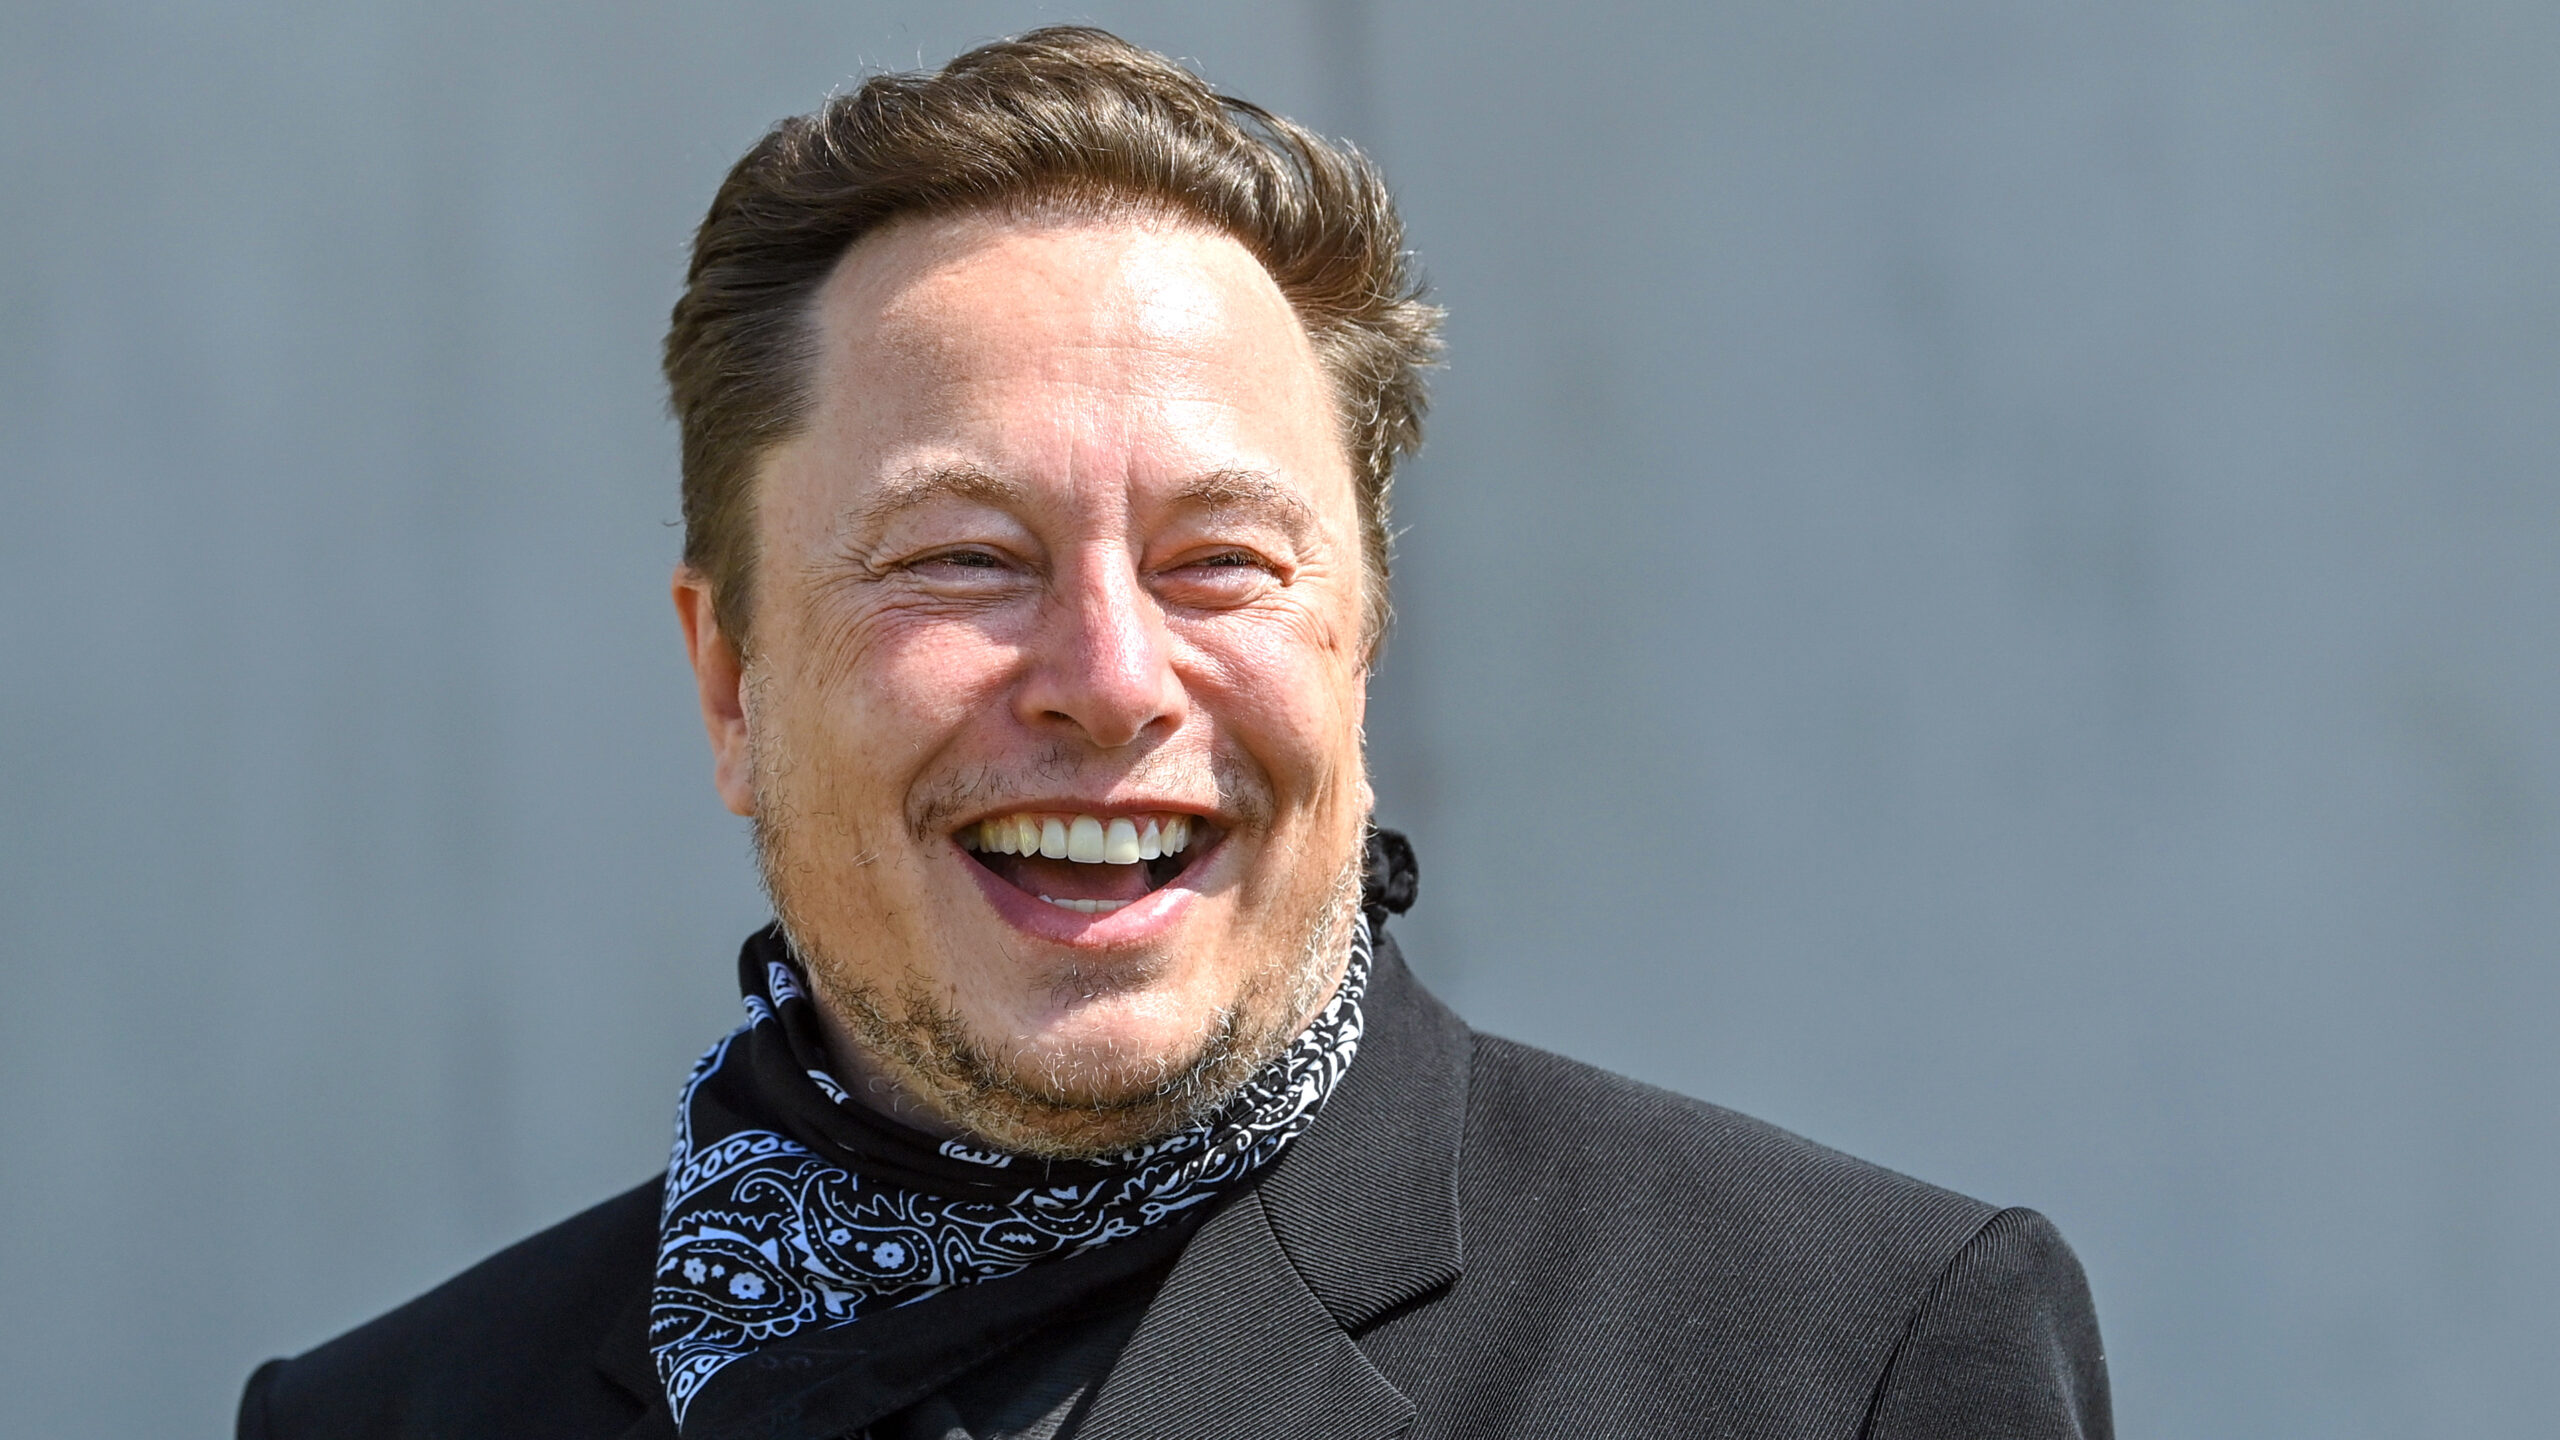 Elon Musk Celebrates Looking Forward To Make Significant Improvements To Twitter